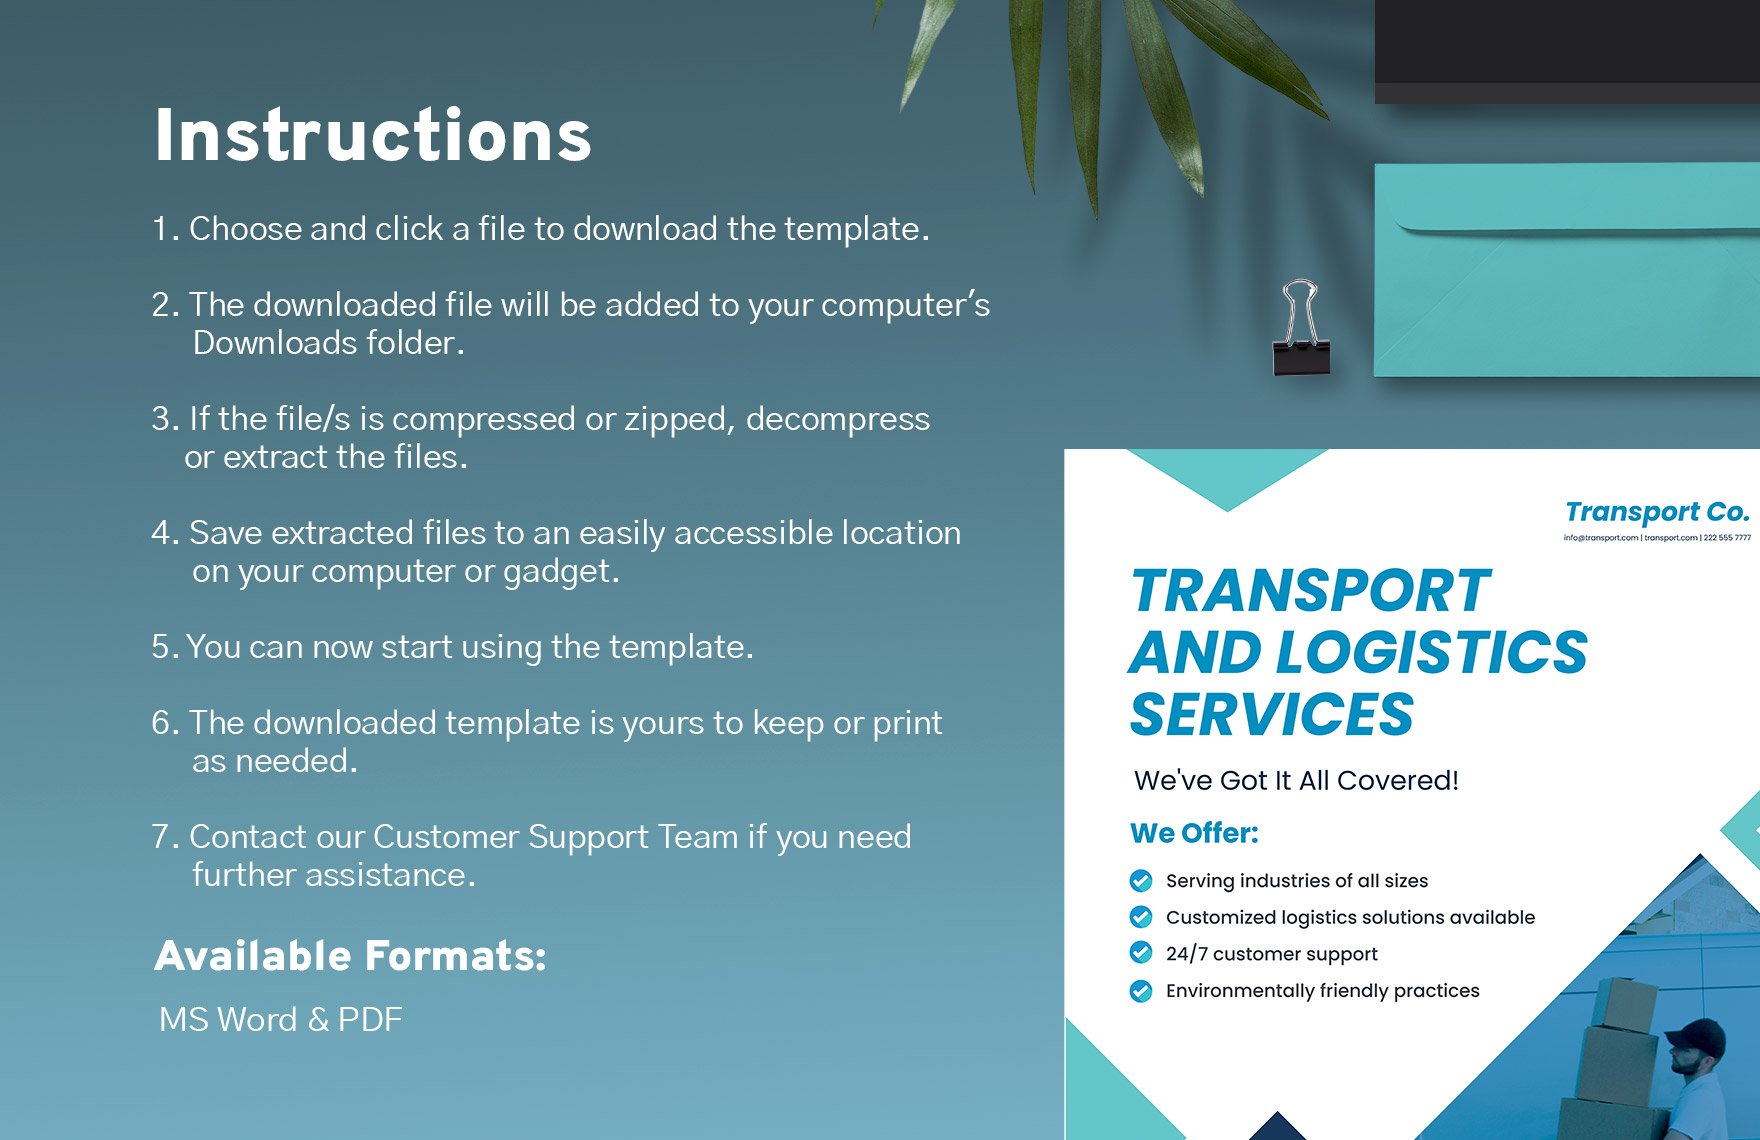 Transport and Logistics Promotional Poster Template